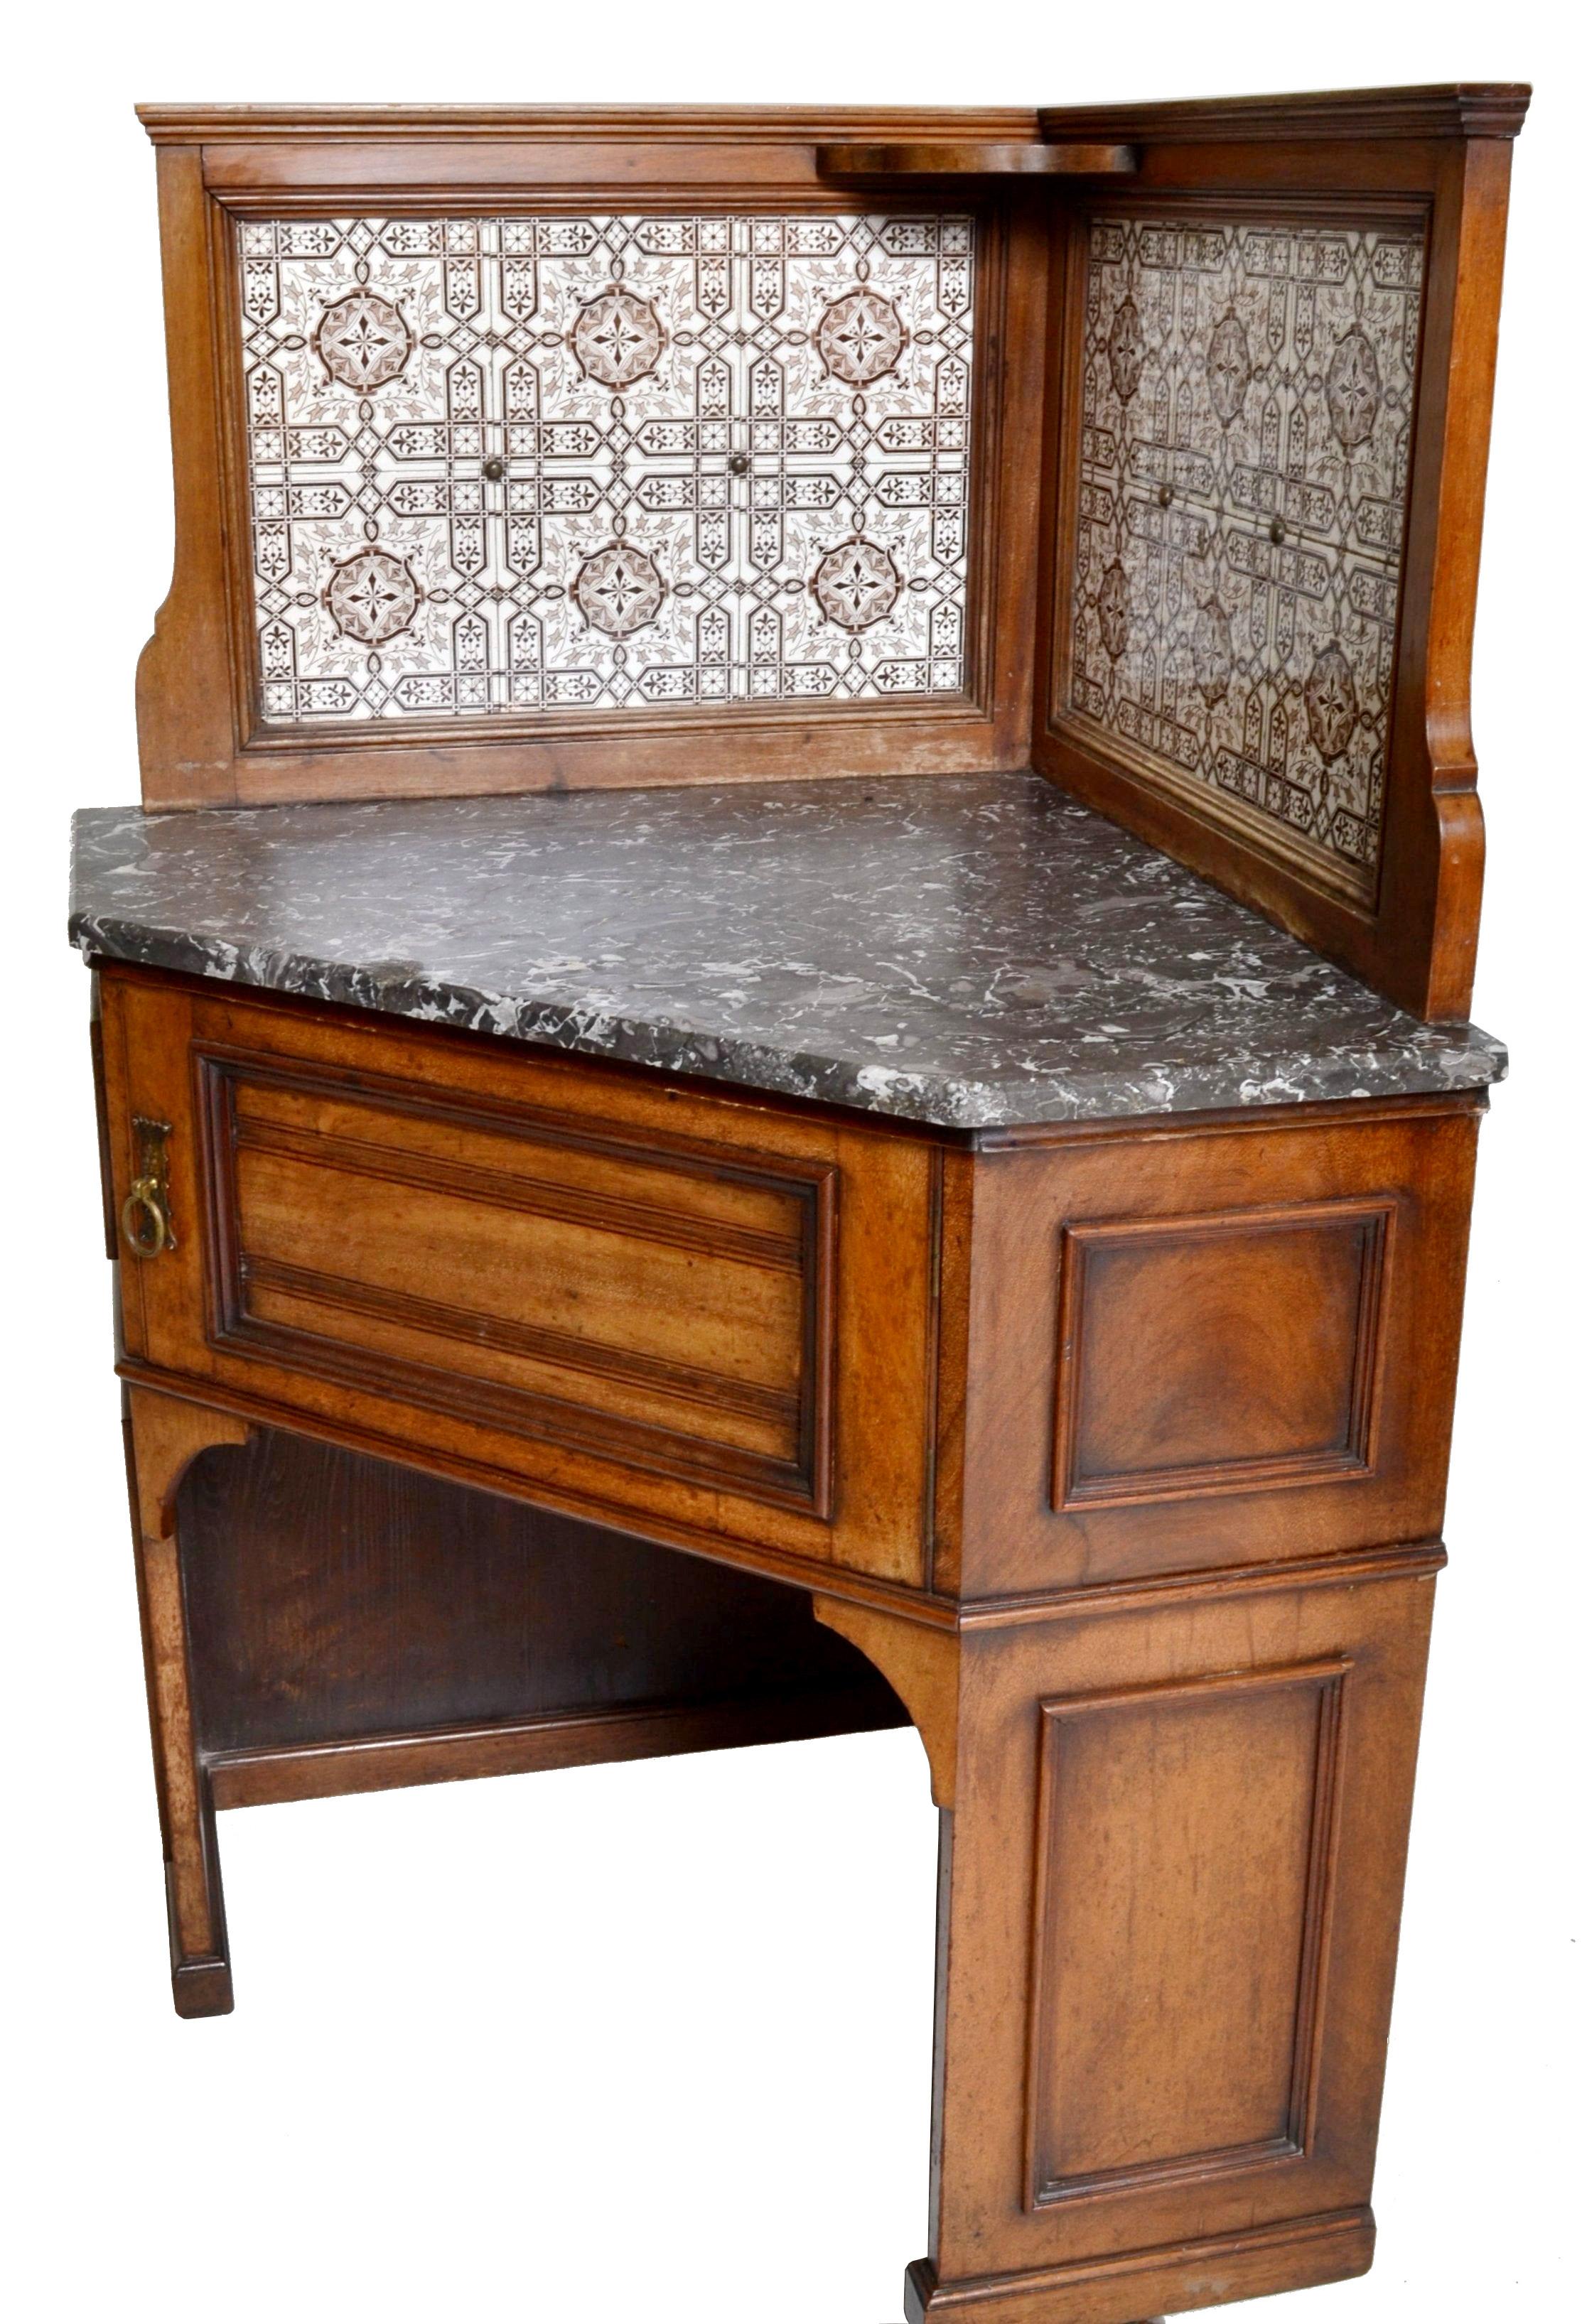 19th century pair of oak corner washstands by Maple of London, in the Aesthetic Movement taste, with Minton's tiles, circa 1875. The galleried splashbacks inlaid with Minton's tiles, each washstand having a variegated marble top. Each having the